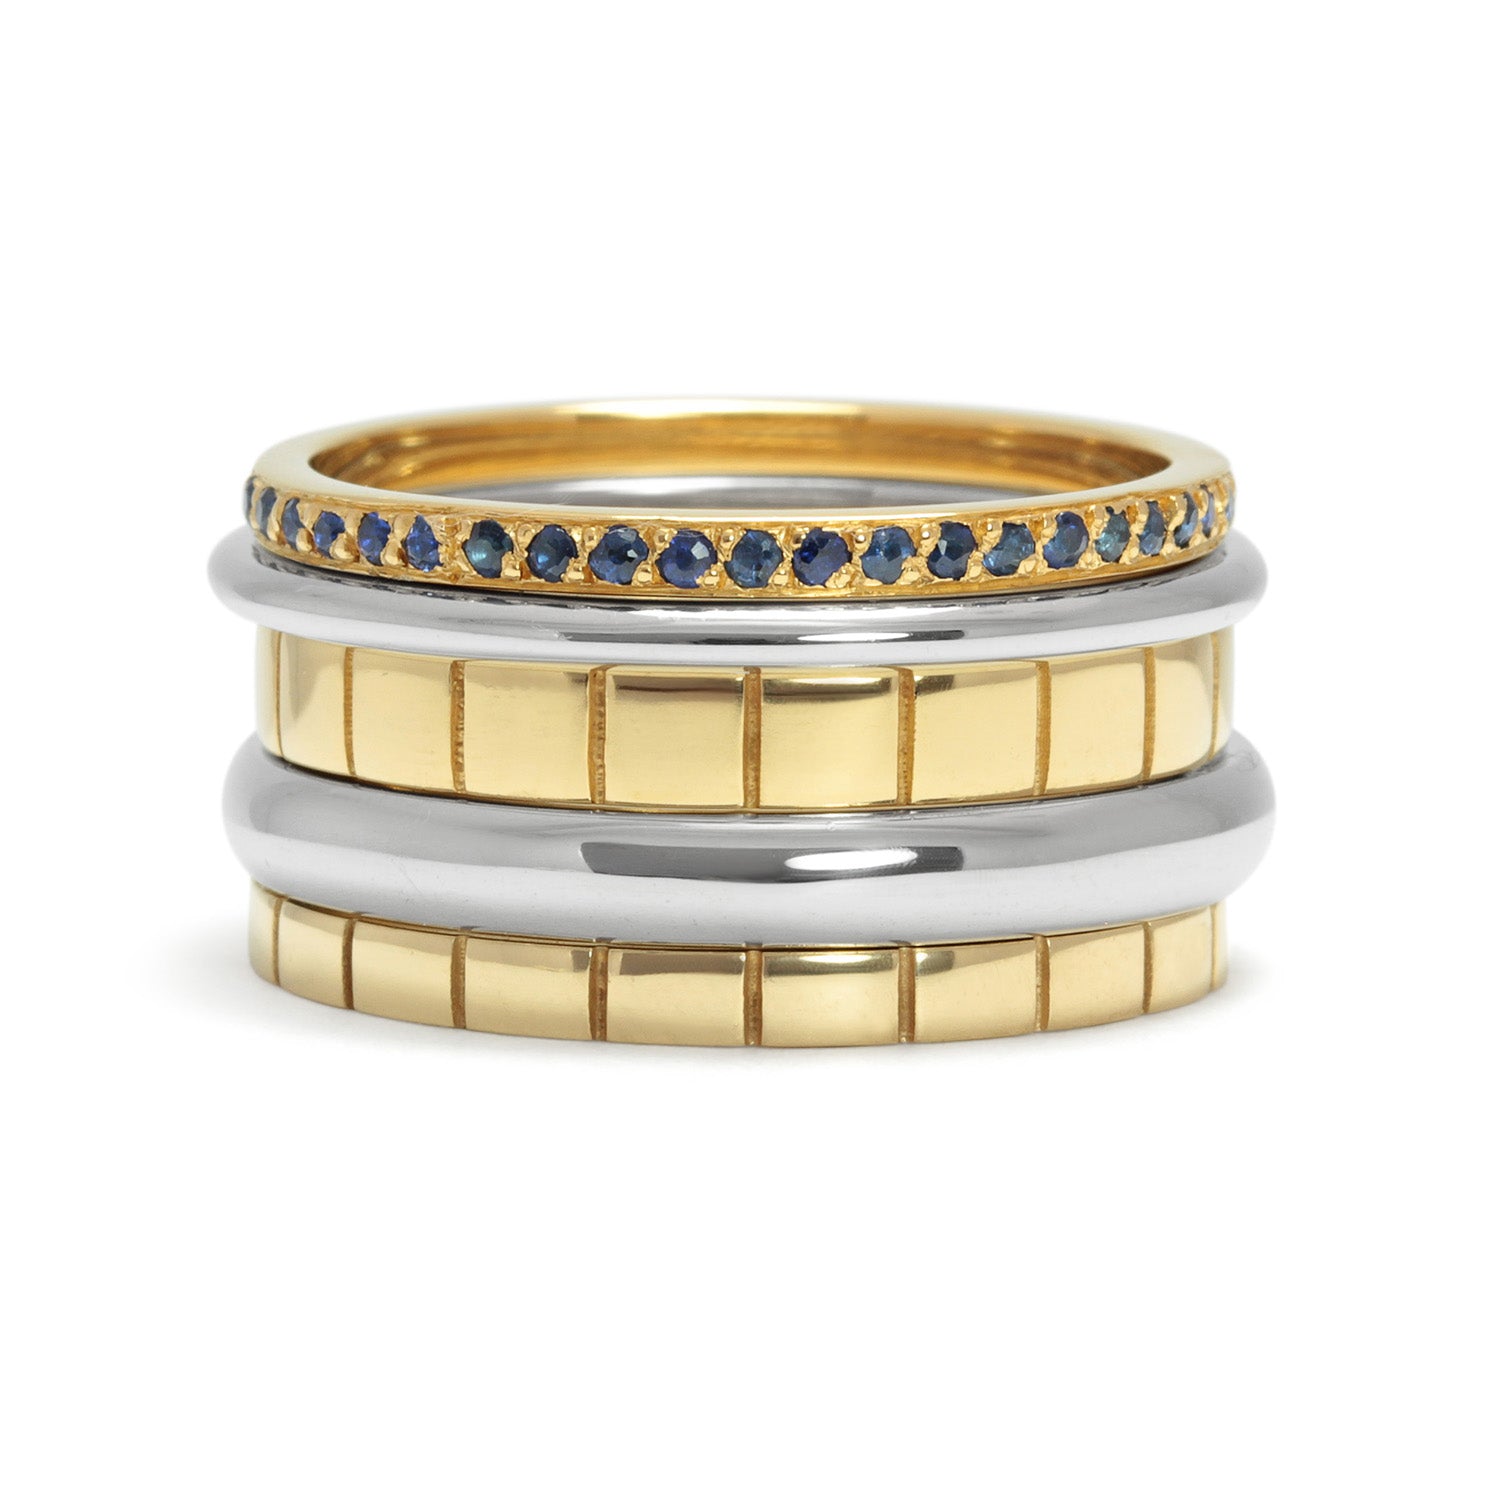 Freedom Ethical Gold Stacking Commitment Wedding Ring, 18ct recycled white and yellow gold, fair-traded Sri Lankan sapphires, conflict-free Canadian diamonds, five bands 2